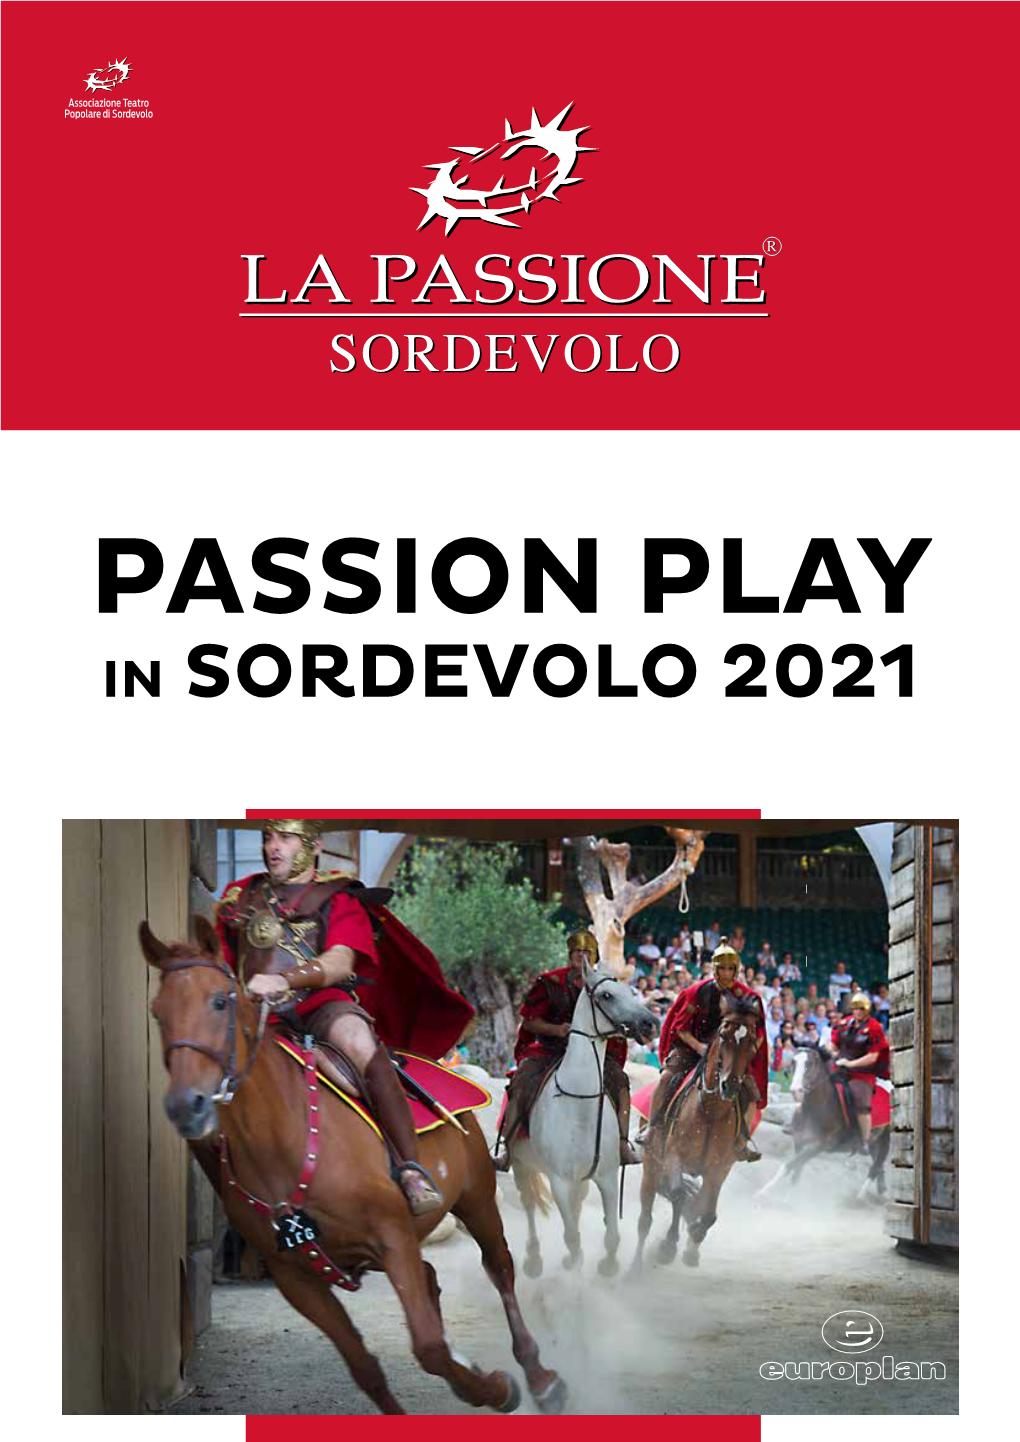 Lake Maggiore and the Passion Play at Sordevolo